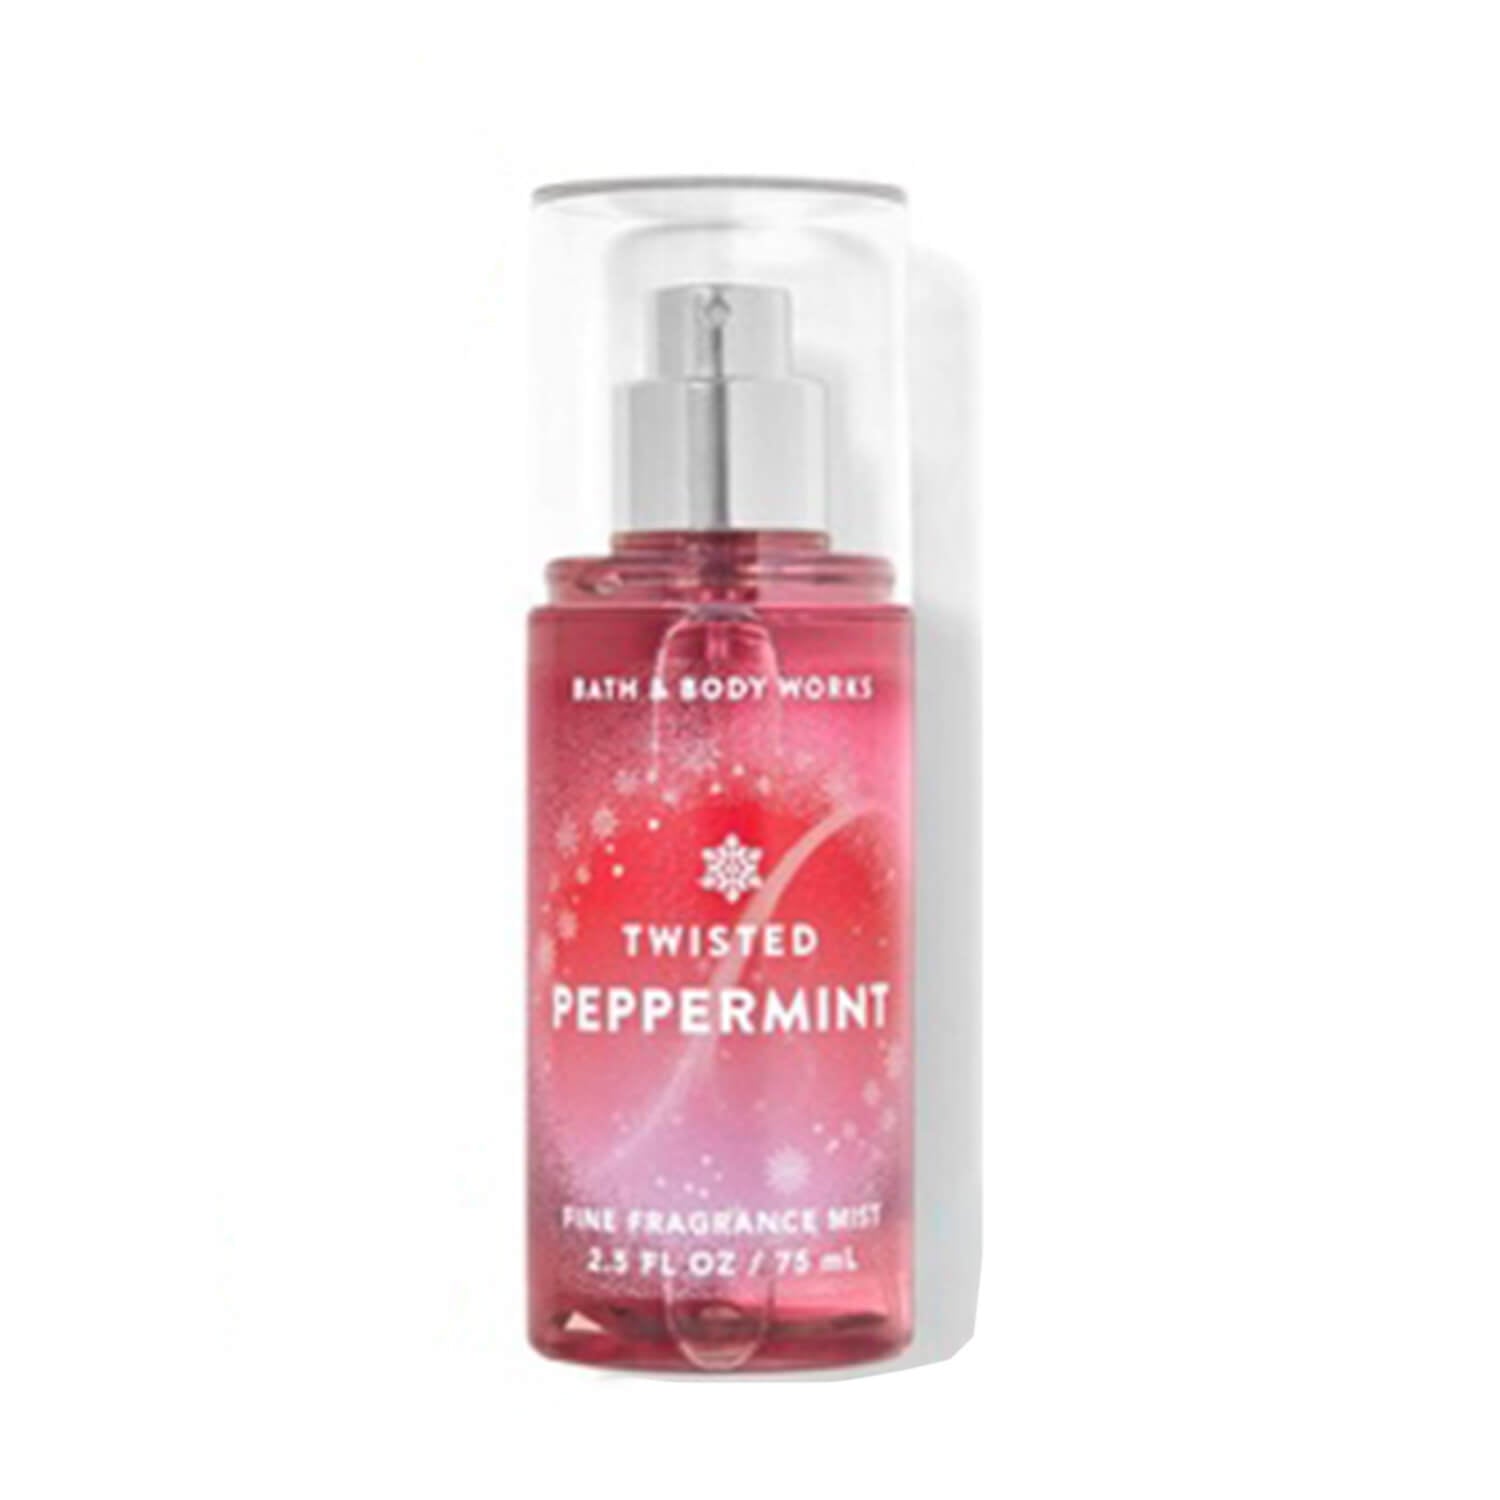 Shop Bath and Body Works travel size mist in twisted peppermint fragrance available at Heygirl.pk for delivery in Pakistan